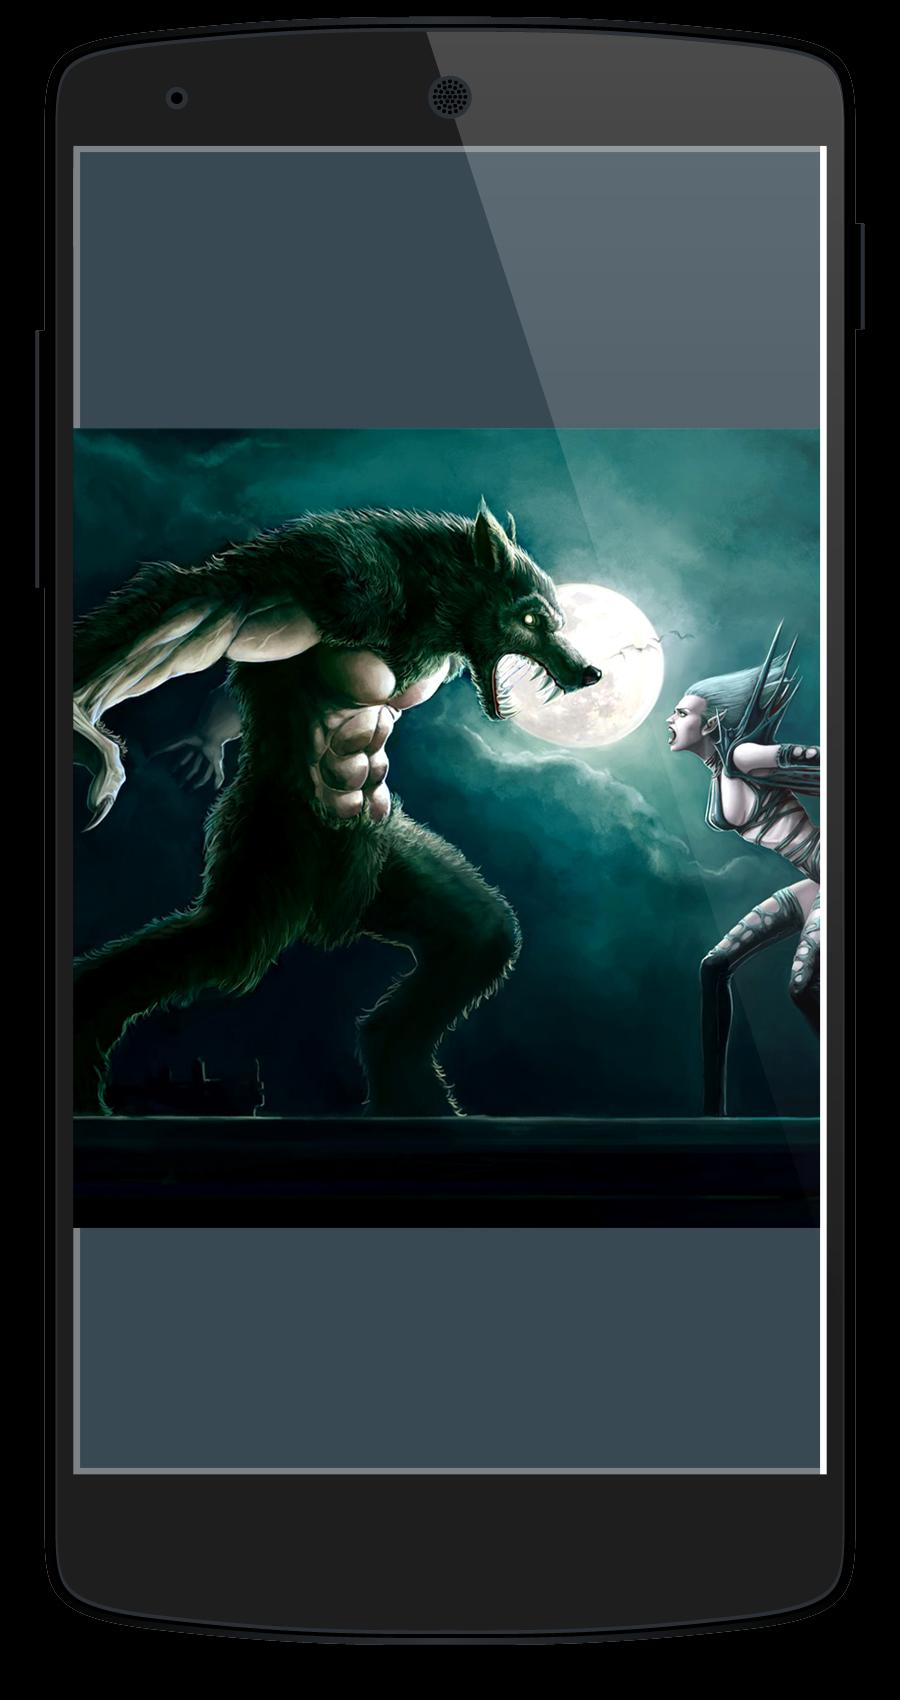 Dark Anime Wallpaper For Android Apk Download